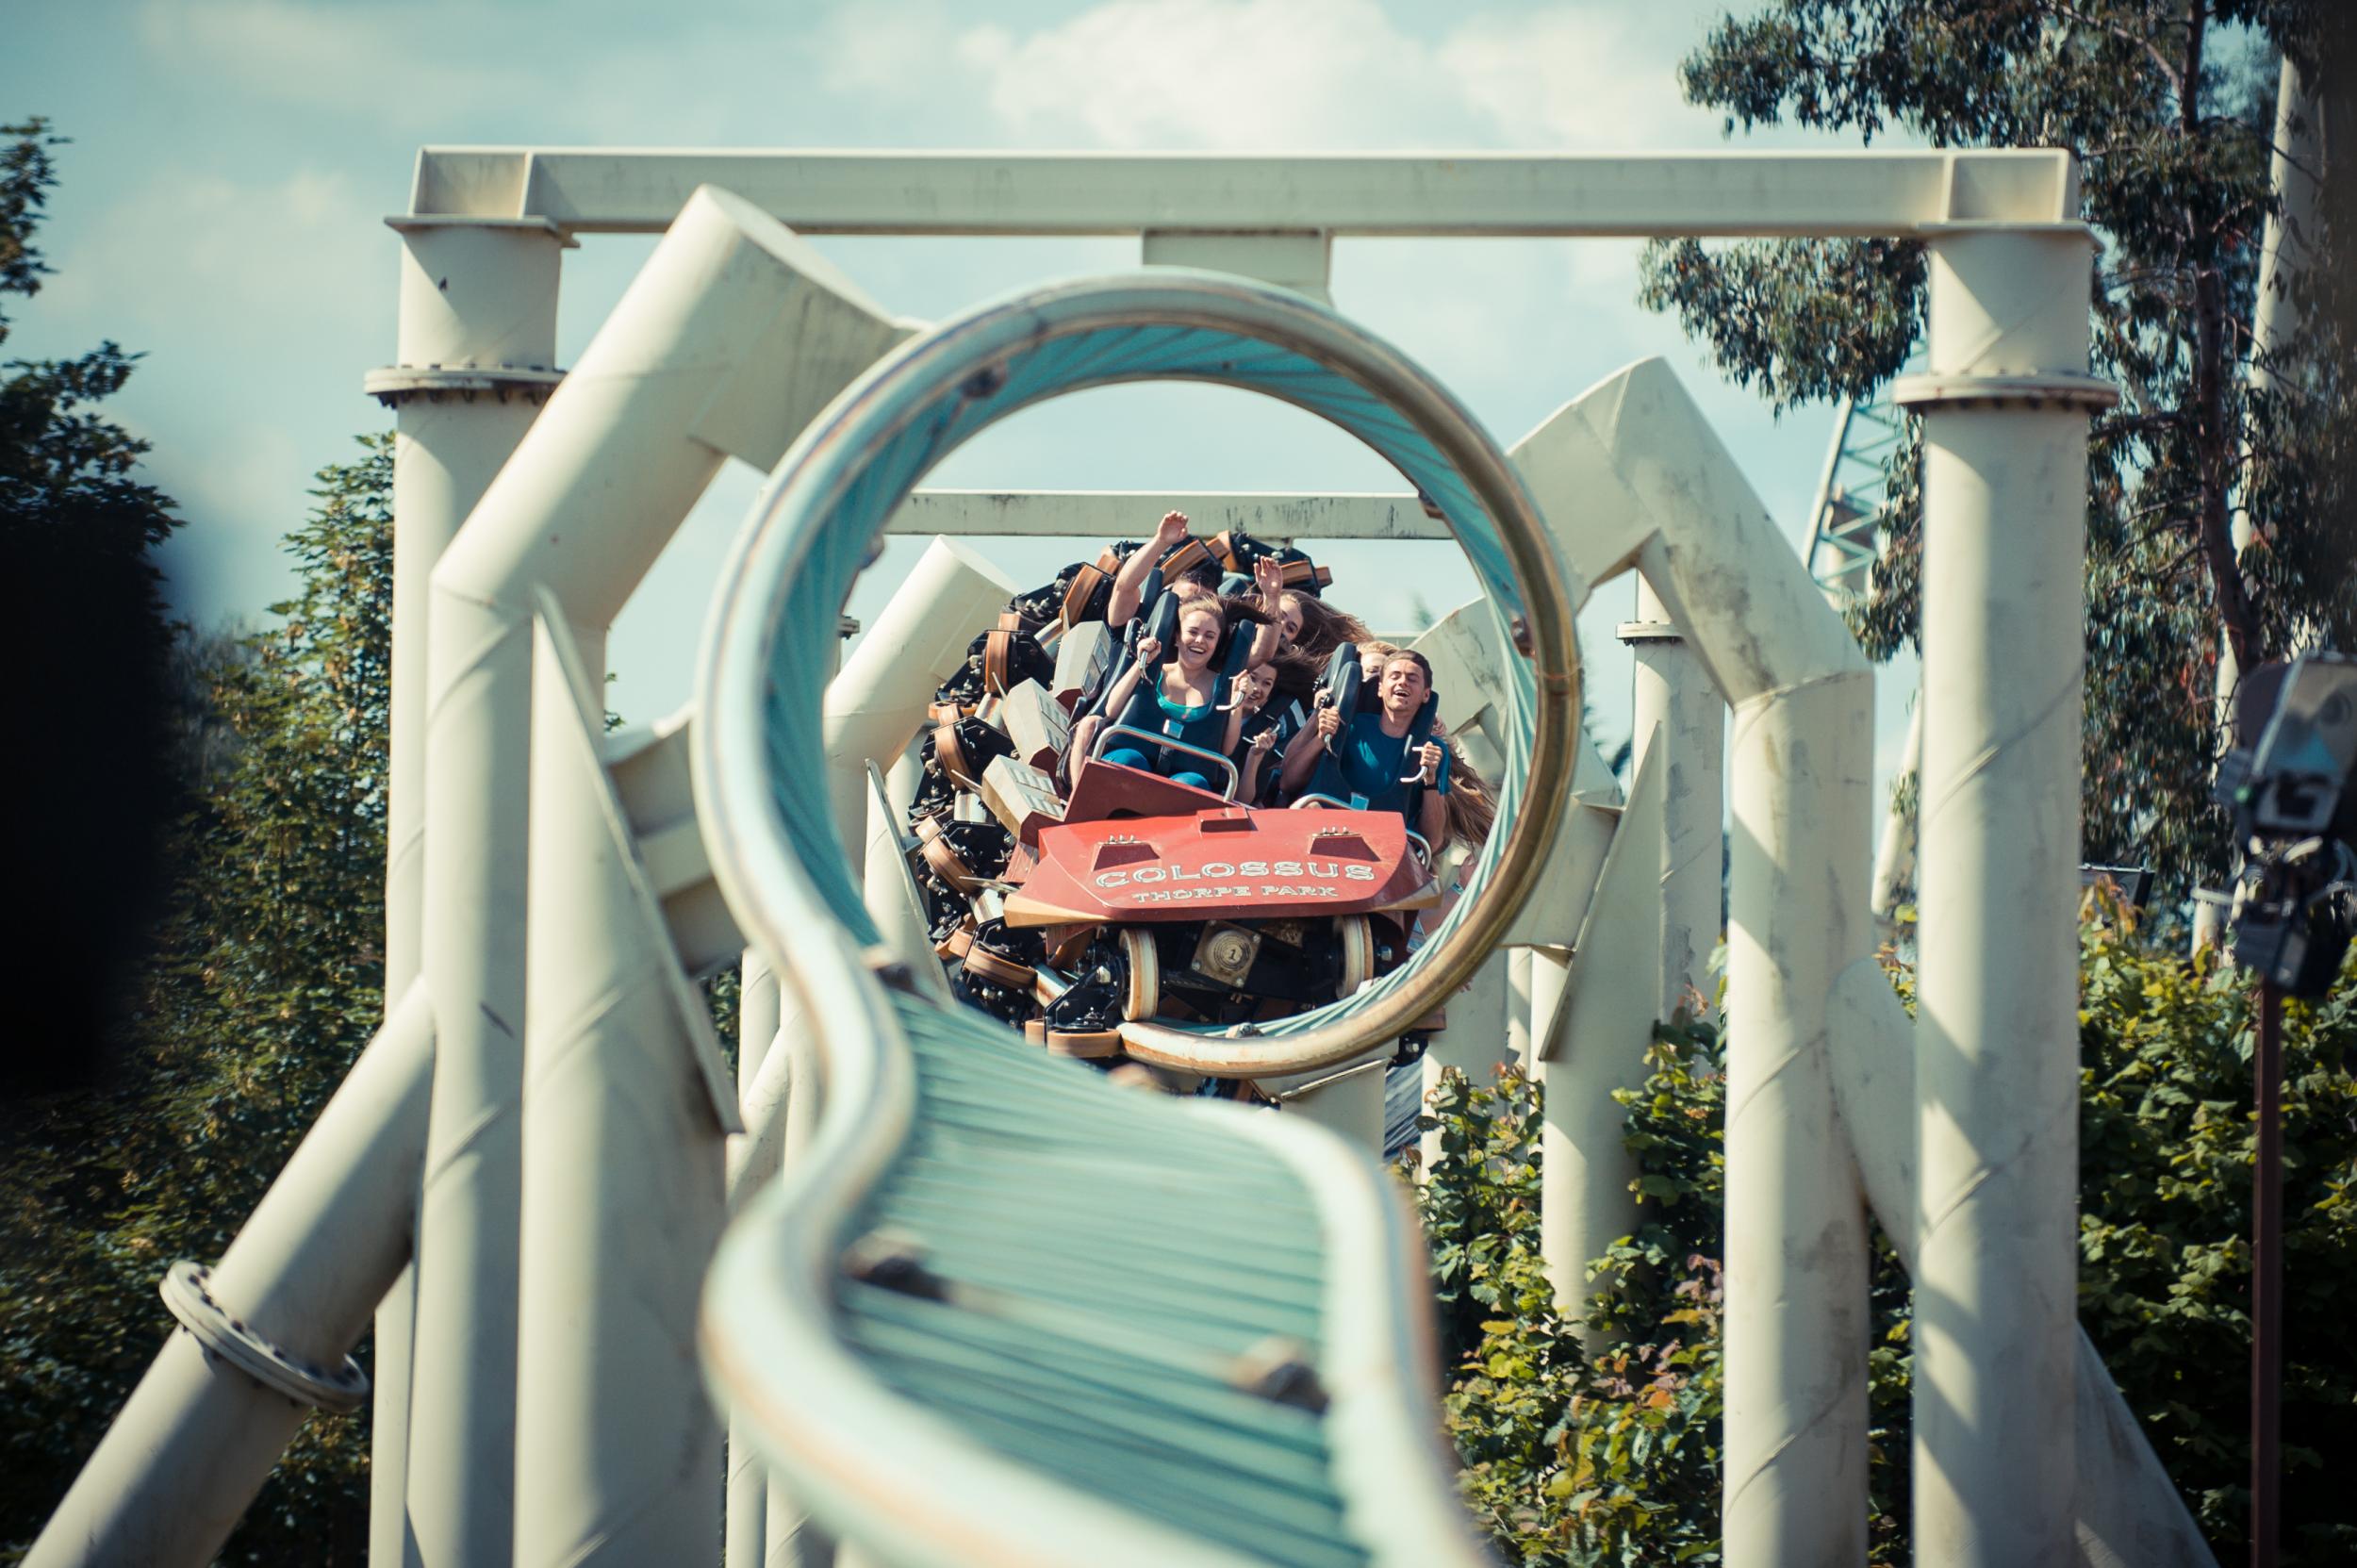 Thorpe Park has some of Europe's most adrenaline-pumping rides